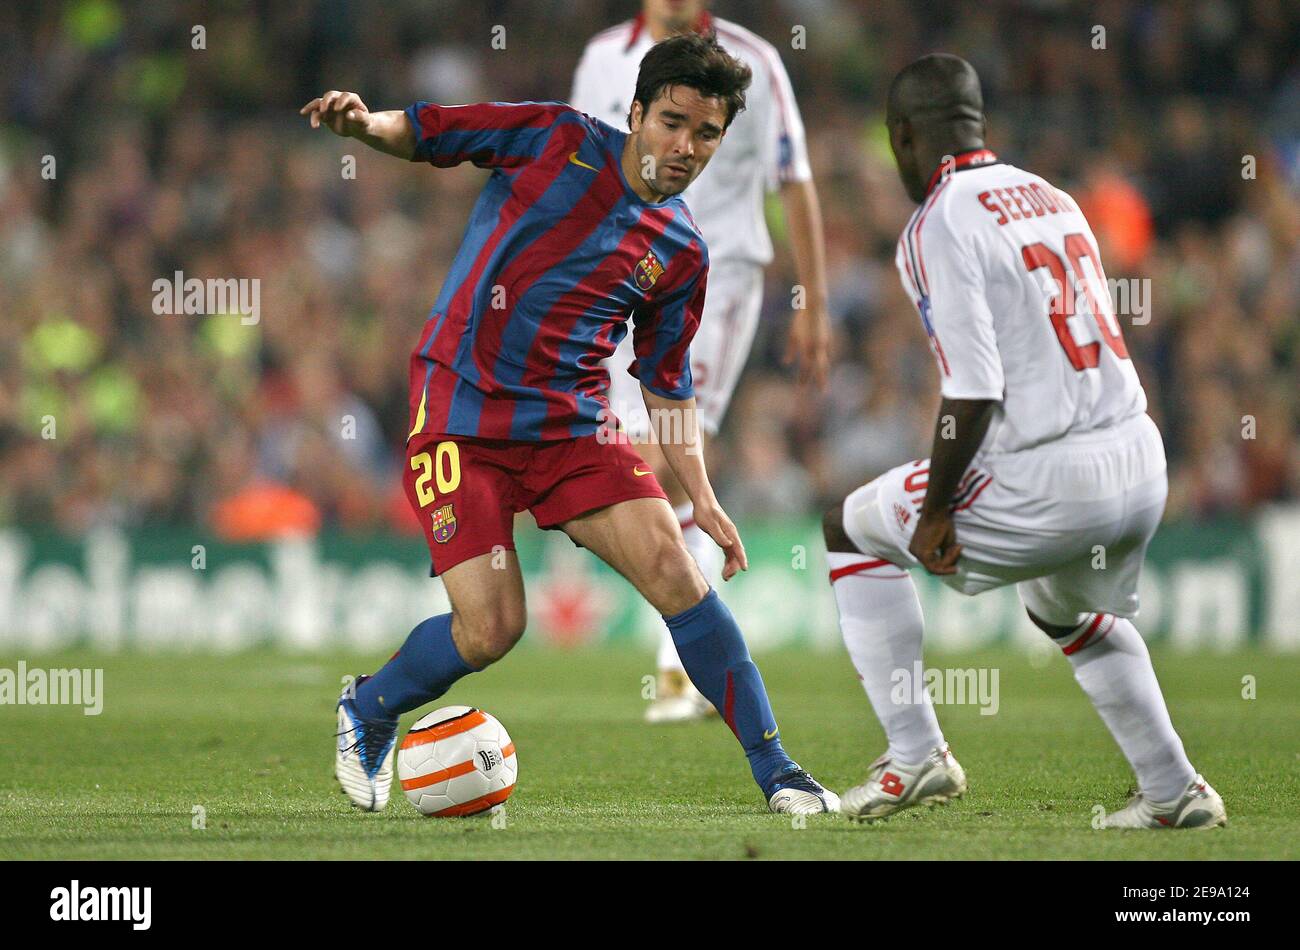 FC Barcelona's Deco and AC Barcelona's Clarence Gattuso in action during the UEFA Champions League Semi-Final Second Leg, Barcelona vs AC Milan in Barcelona, Spain, on April 26, 2006. The game ended in a draw 0-0 and Barcelona is qualified for the finale. Photo by Christian Liewig/ABACAPRESS.COM Stock Photo